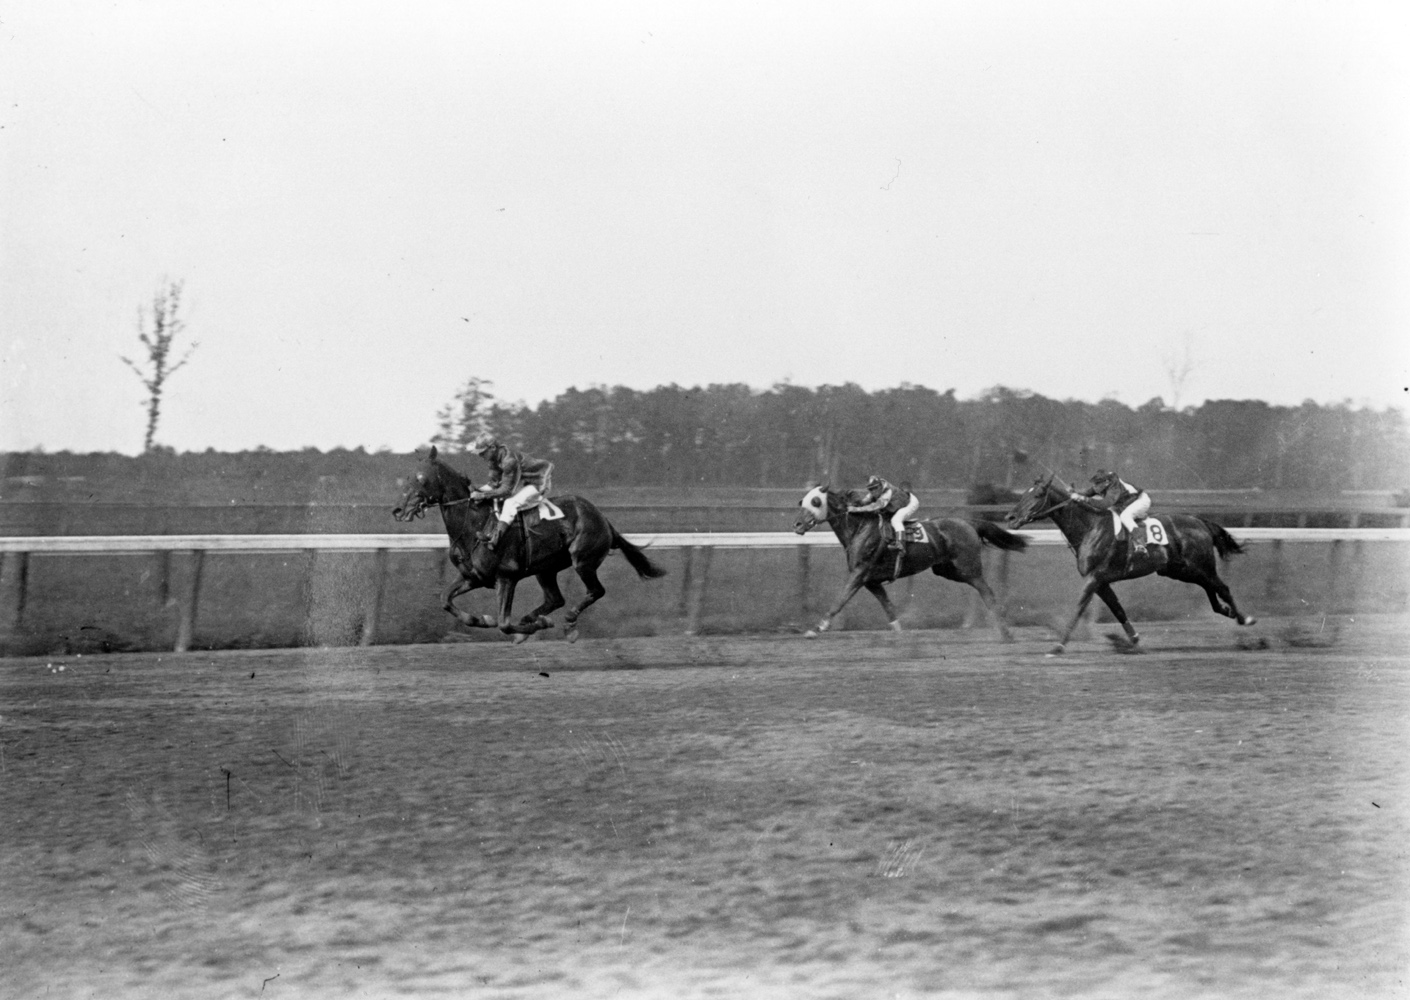 Roseben (J. McIntyre up) winning a race at Belmont Park in May 1909, his final career win (Keeneland Library Cook Collection/Museum Collection)